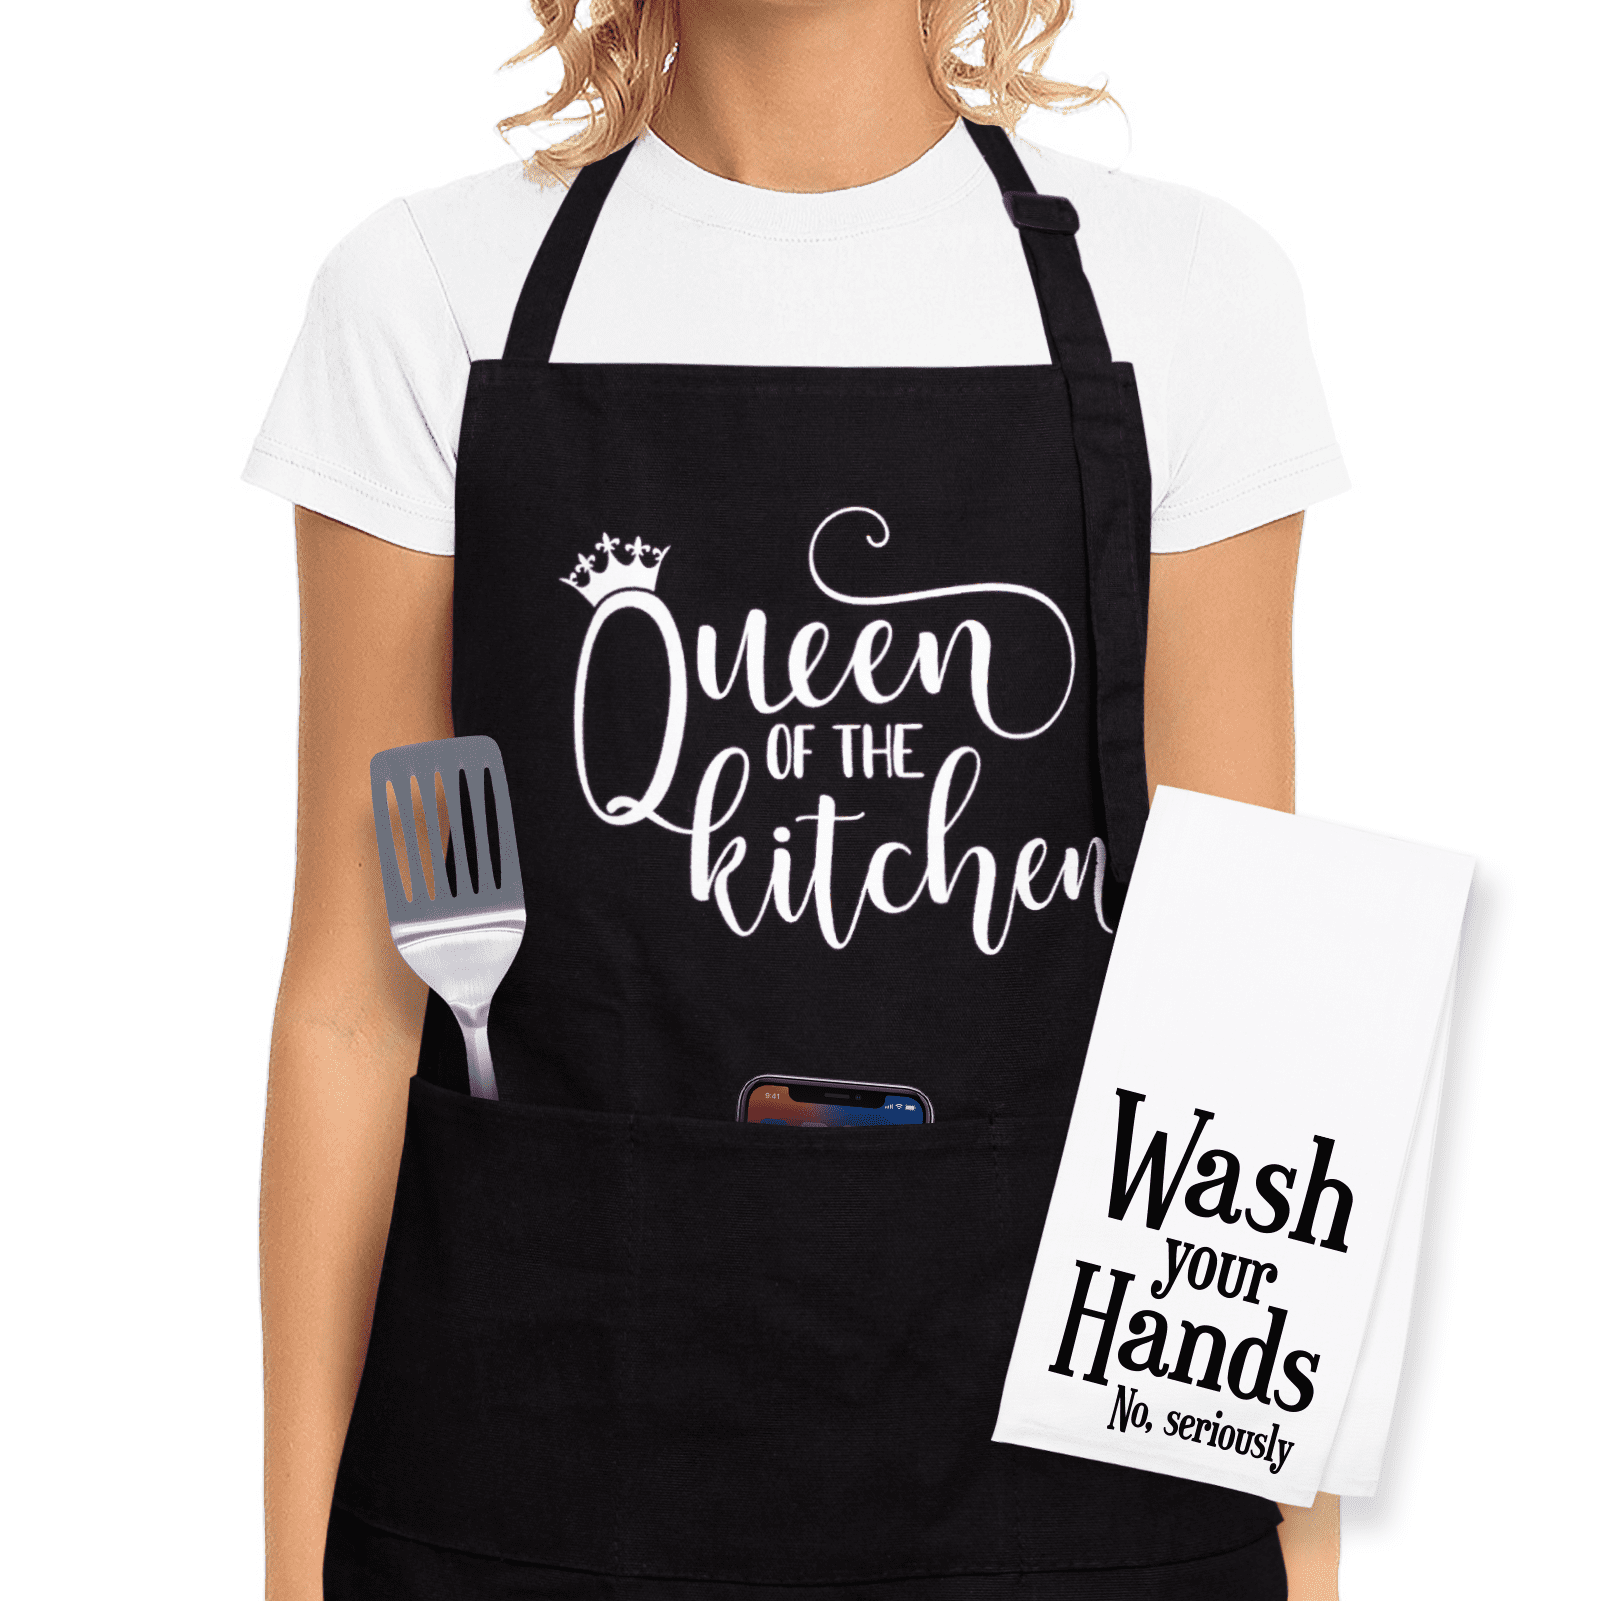 Mom's Badass Home Cooking Apron, Gift for Mom